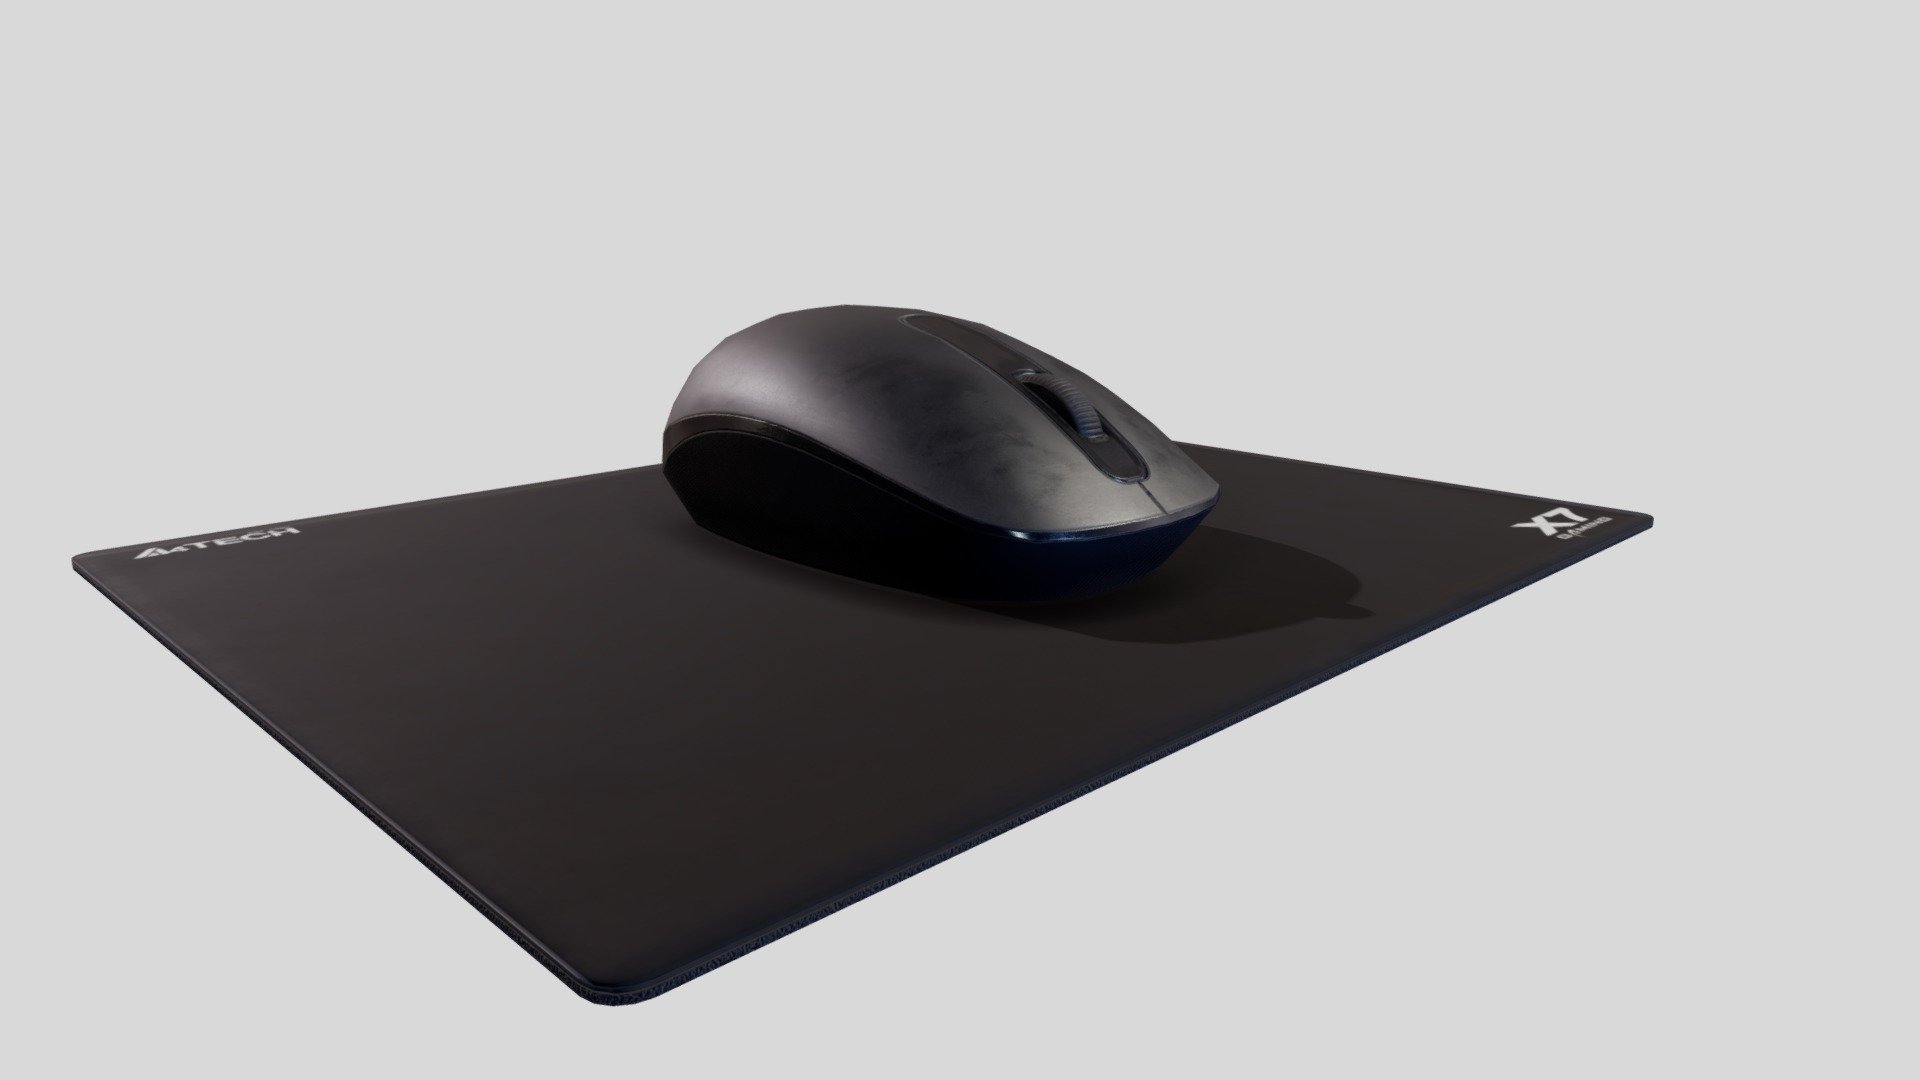 Computer Mouse 3D model with PBR maps 4096x4096 such as: • BaseColor • Metallic • Roughness •  Ambient Occlusion • NormalDirectX • 
Model in real scale (meters) 
Genius · Standard interface · Wireless · Bluetooth · Wired · Ergonomic · Left-handed · Optical · Programmable · 3 buttons Black colour. Item weight with packaging (g) 85 g. Item height 3.7 cm. Item depth 6 cm. Item width 10.5 cm. Packing width 11 cm. Packing height 5.3 cm. Packing depth 6.9 cm - Computer Mouse Low-poly 3D model - Buy Royalty Free 3D model by Andrew.Maria 3d model